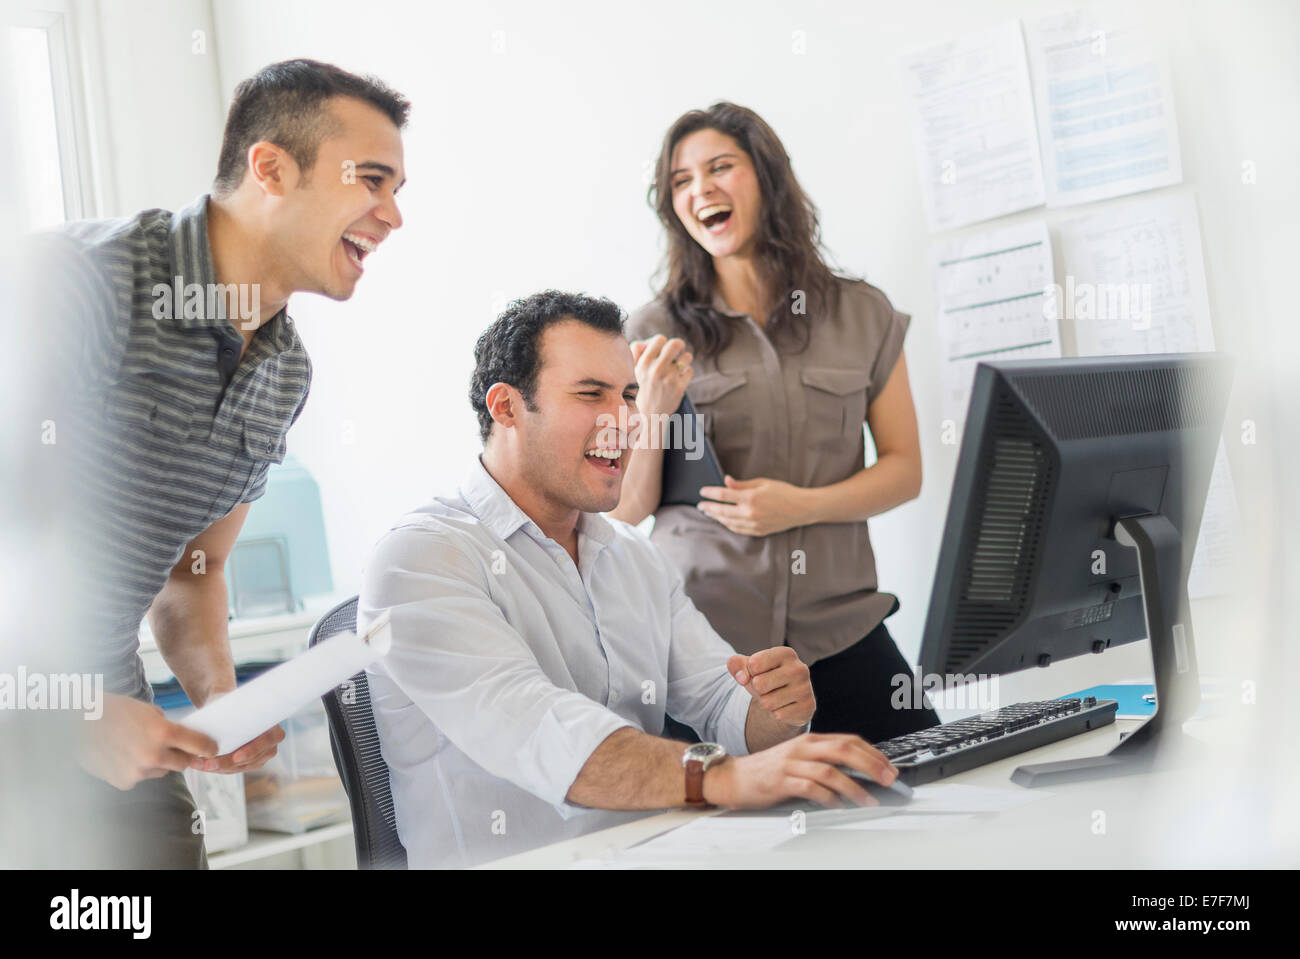 Hispanic business people laughing together in office Stock Photo